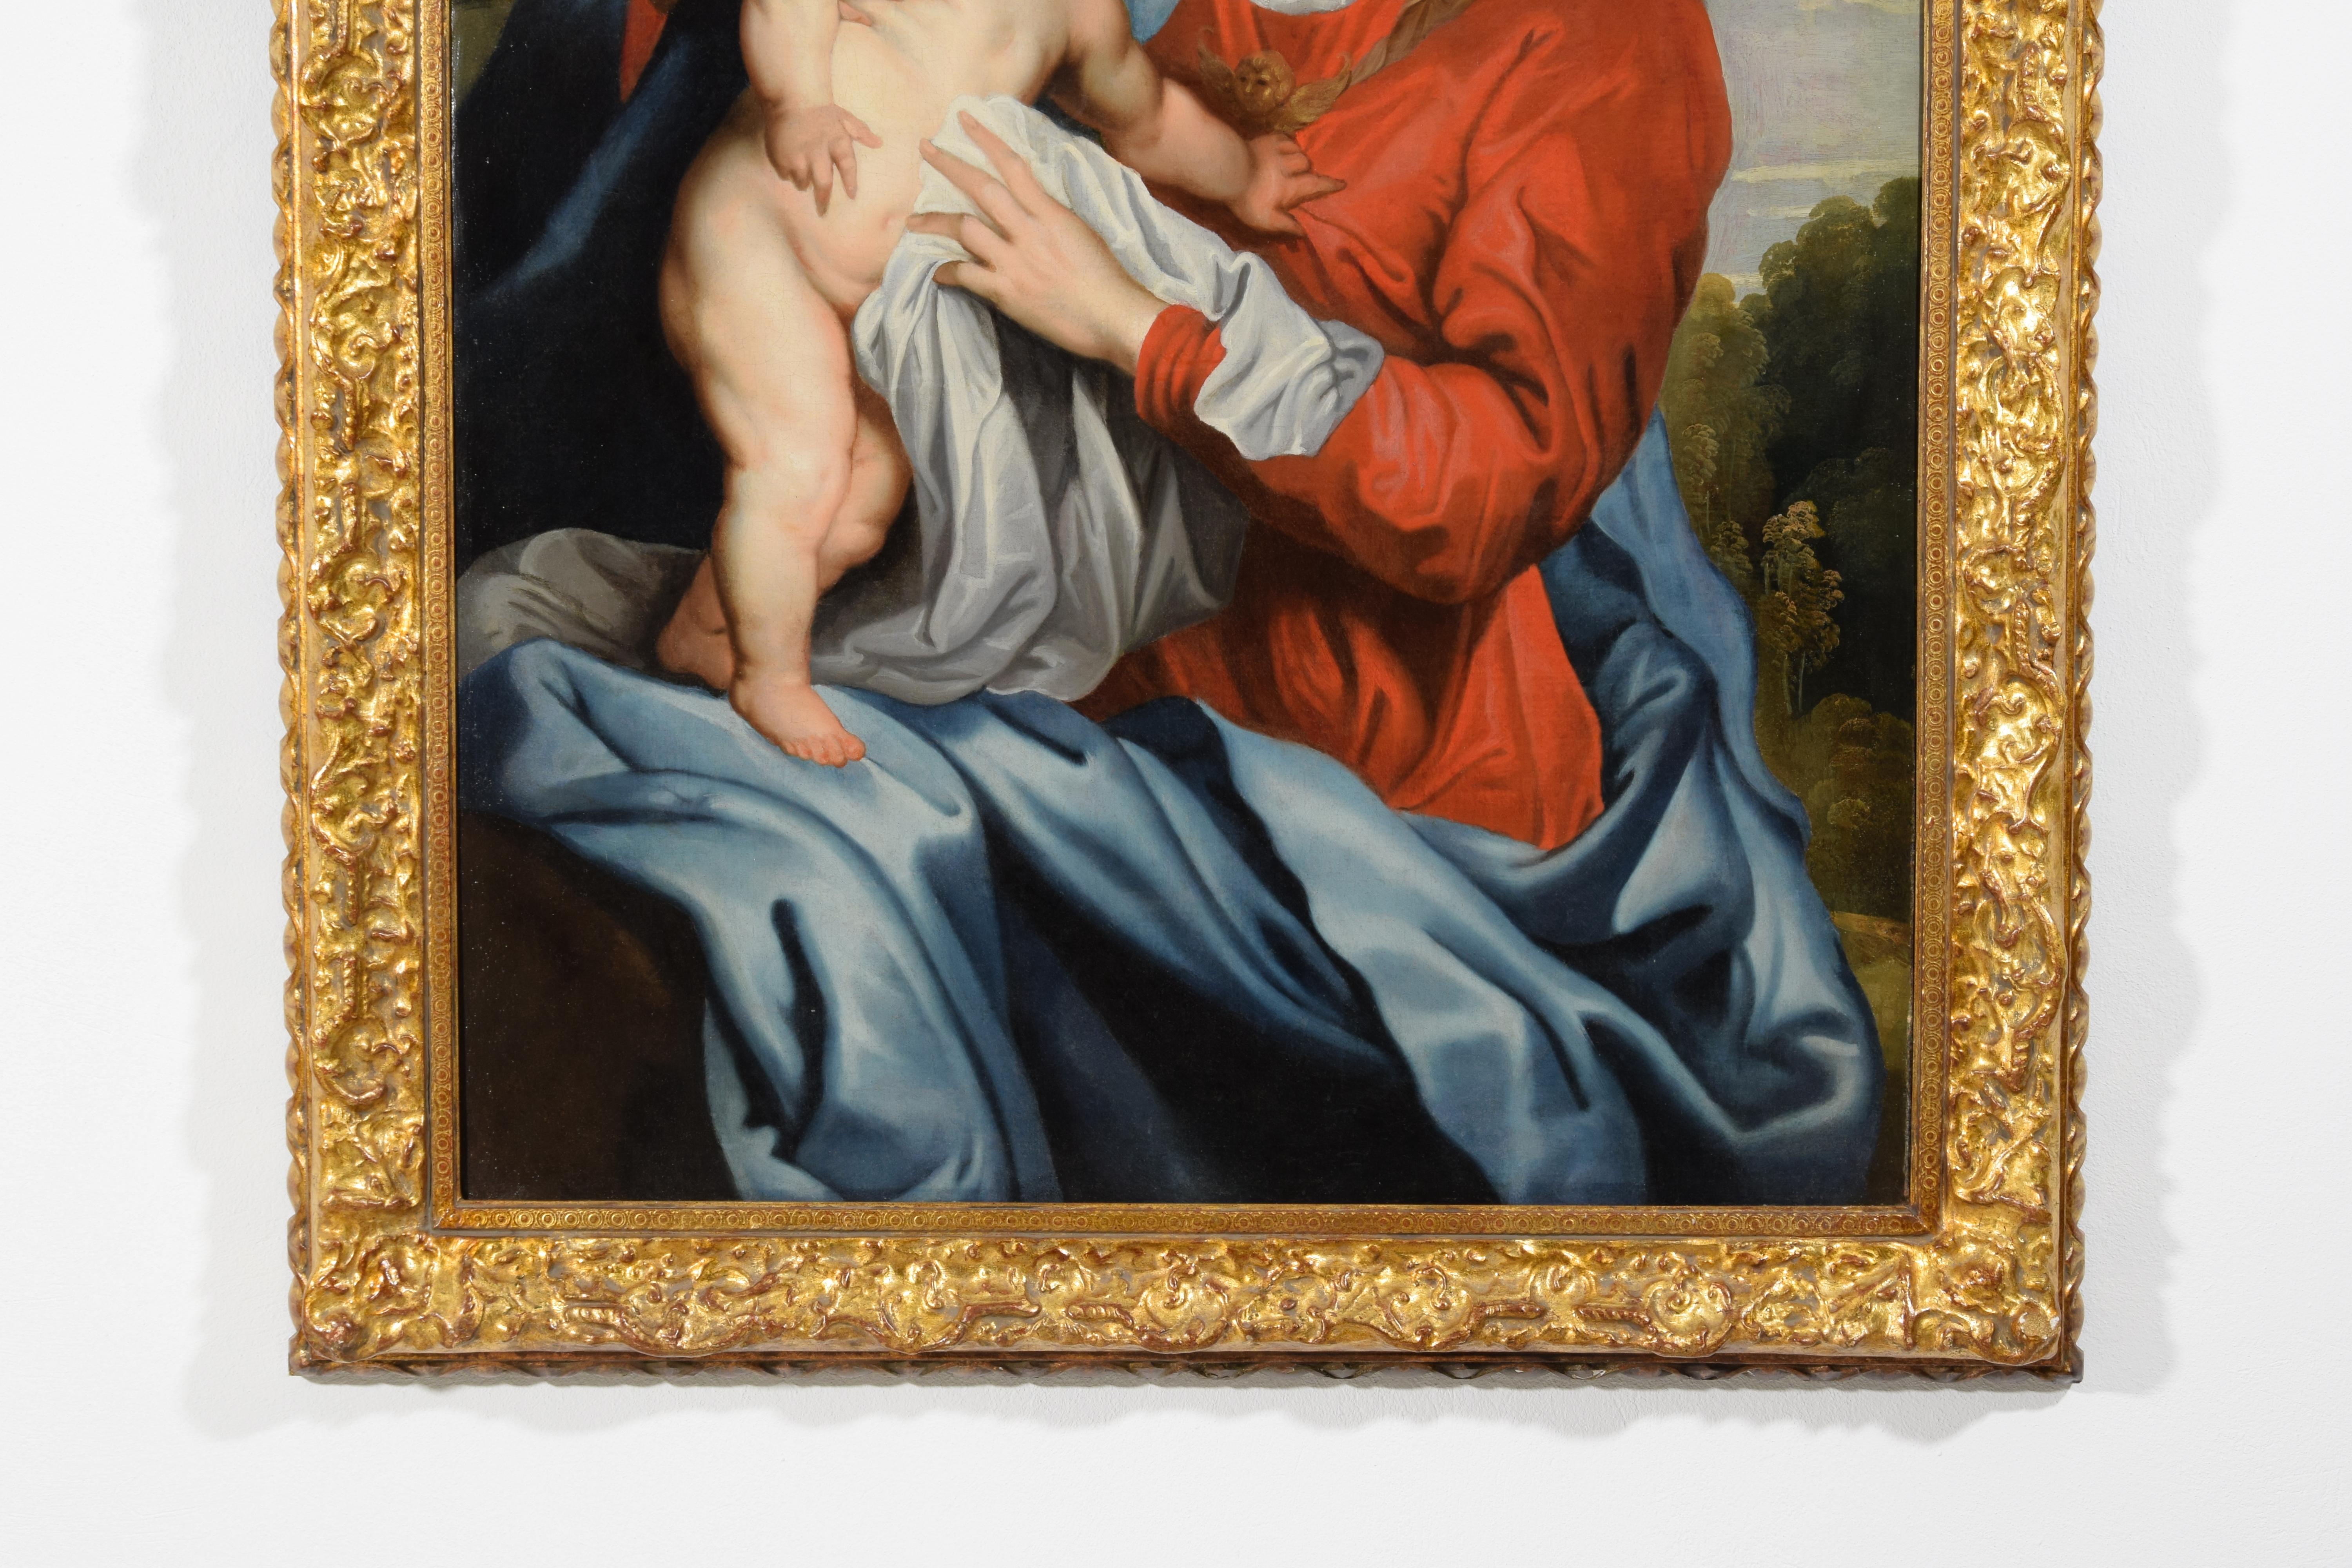 Hand-Painted 17th Century, Italian Painting with Virgin and Child by Follower of Van Dyck For Sale